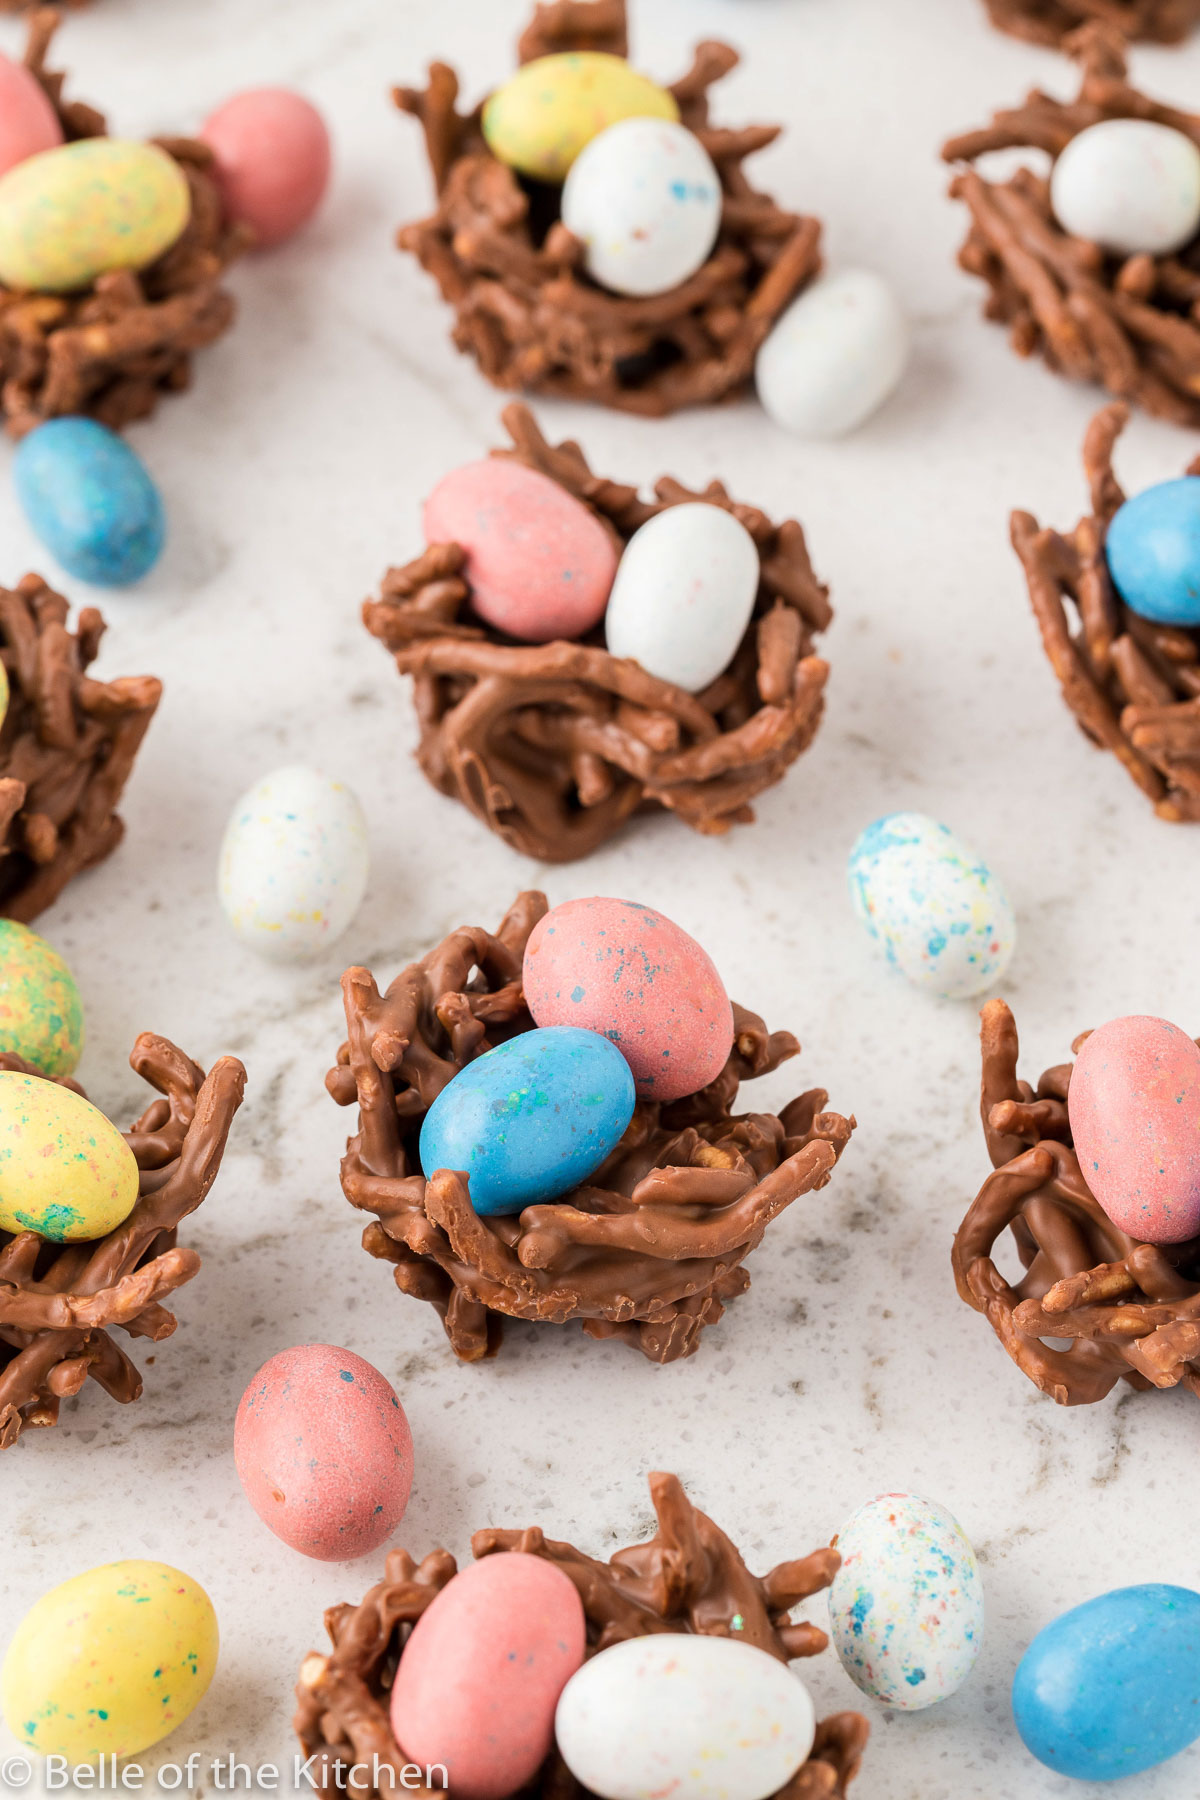 birds nest cookies with egg candies on top.